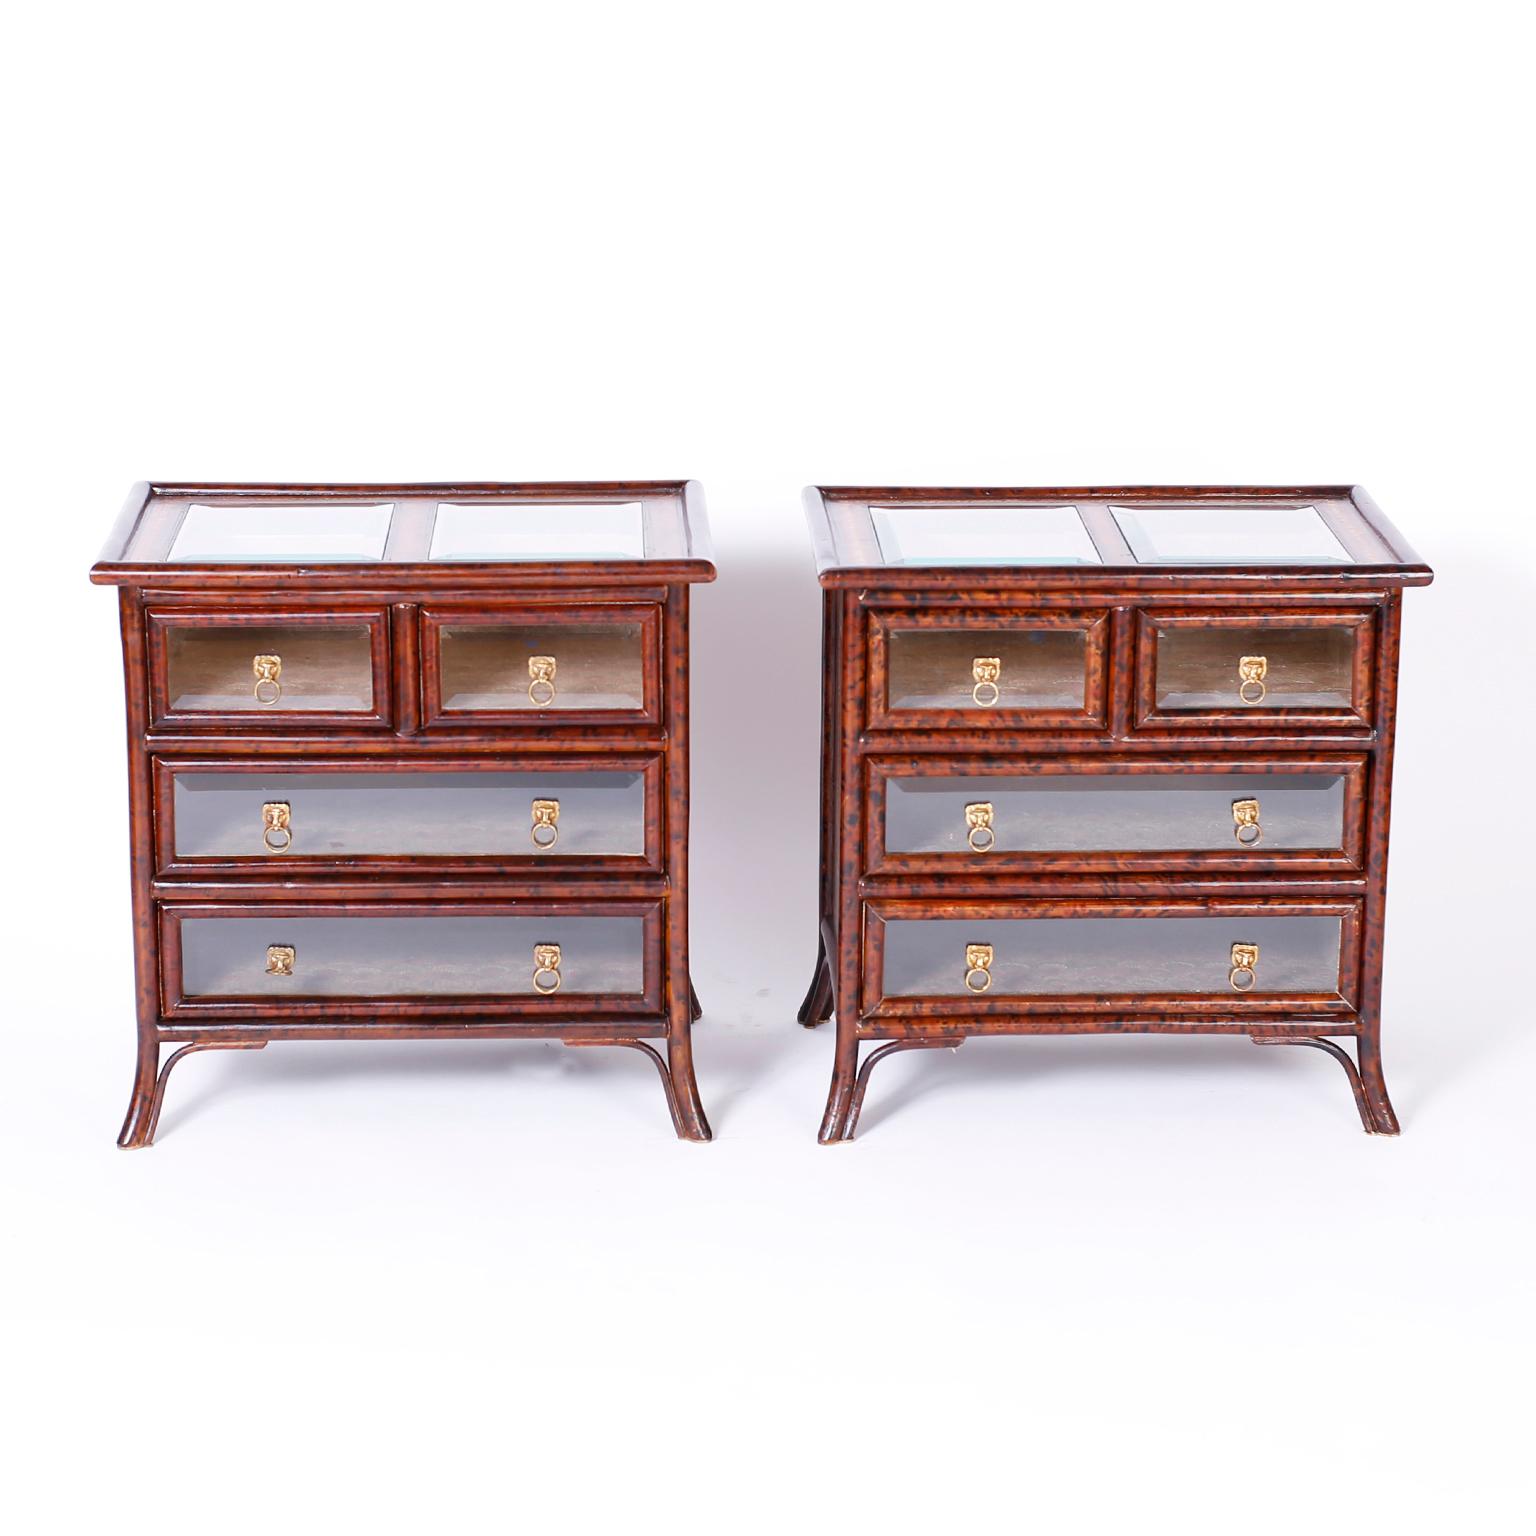 British colonial style stands with faux tortoise bamboo frames and tooled leather panels on the sides and back, featuring bevelled glass panes on the top and four drawer fronts. The drawers are lined with marbleized book paper and have brass lion's